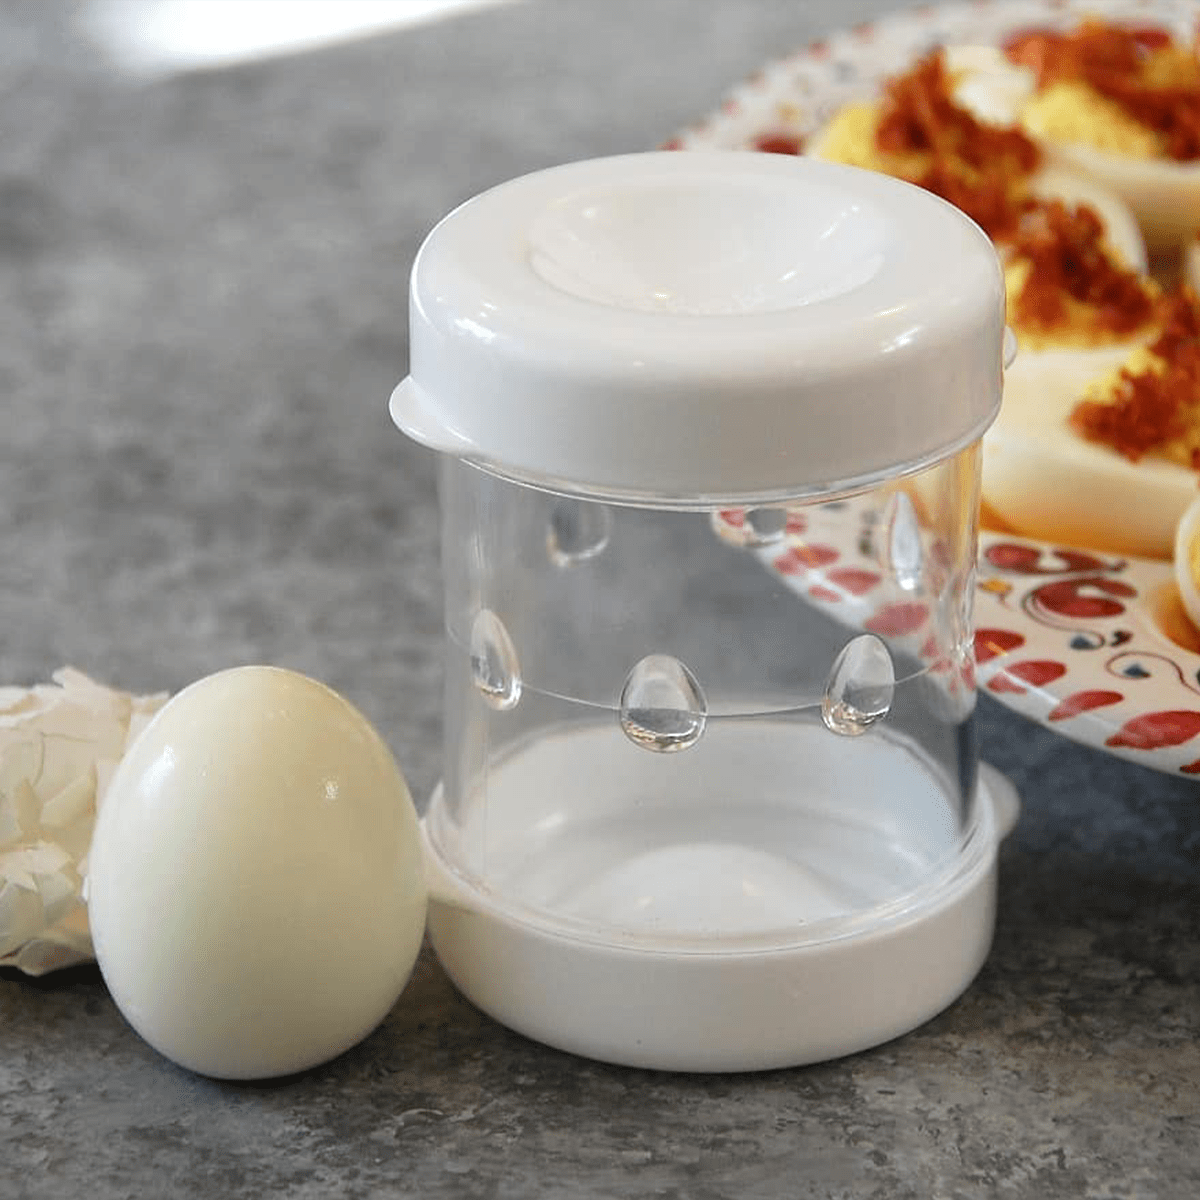 $18 Negg gadget promises to peel a boiled egg in SECONDS by shaking it